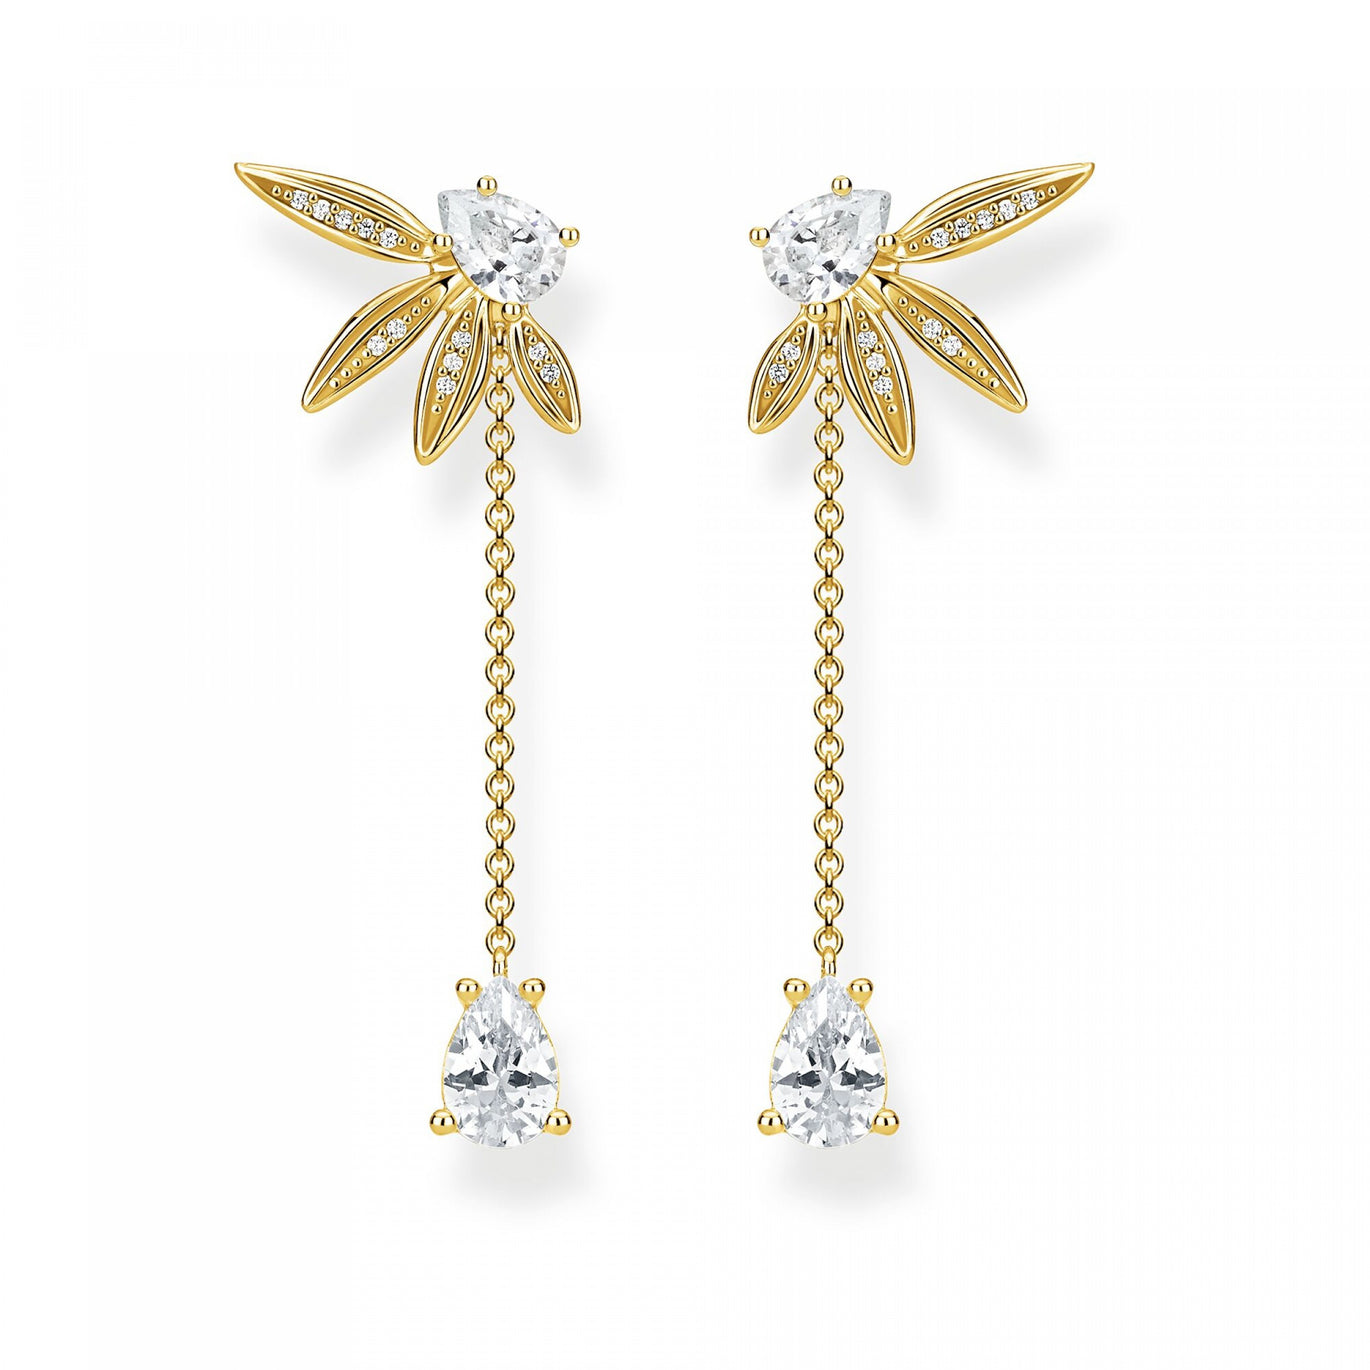 Thomas Sabo Leaves Earrings with Chain, Gold